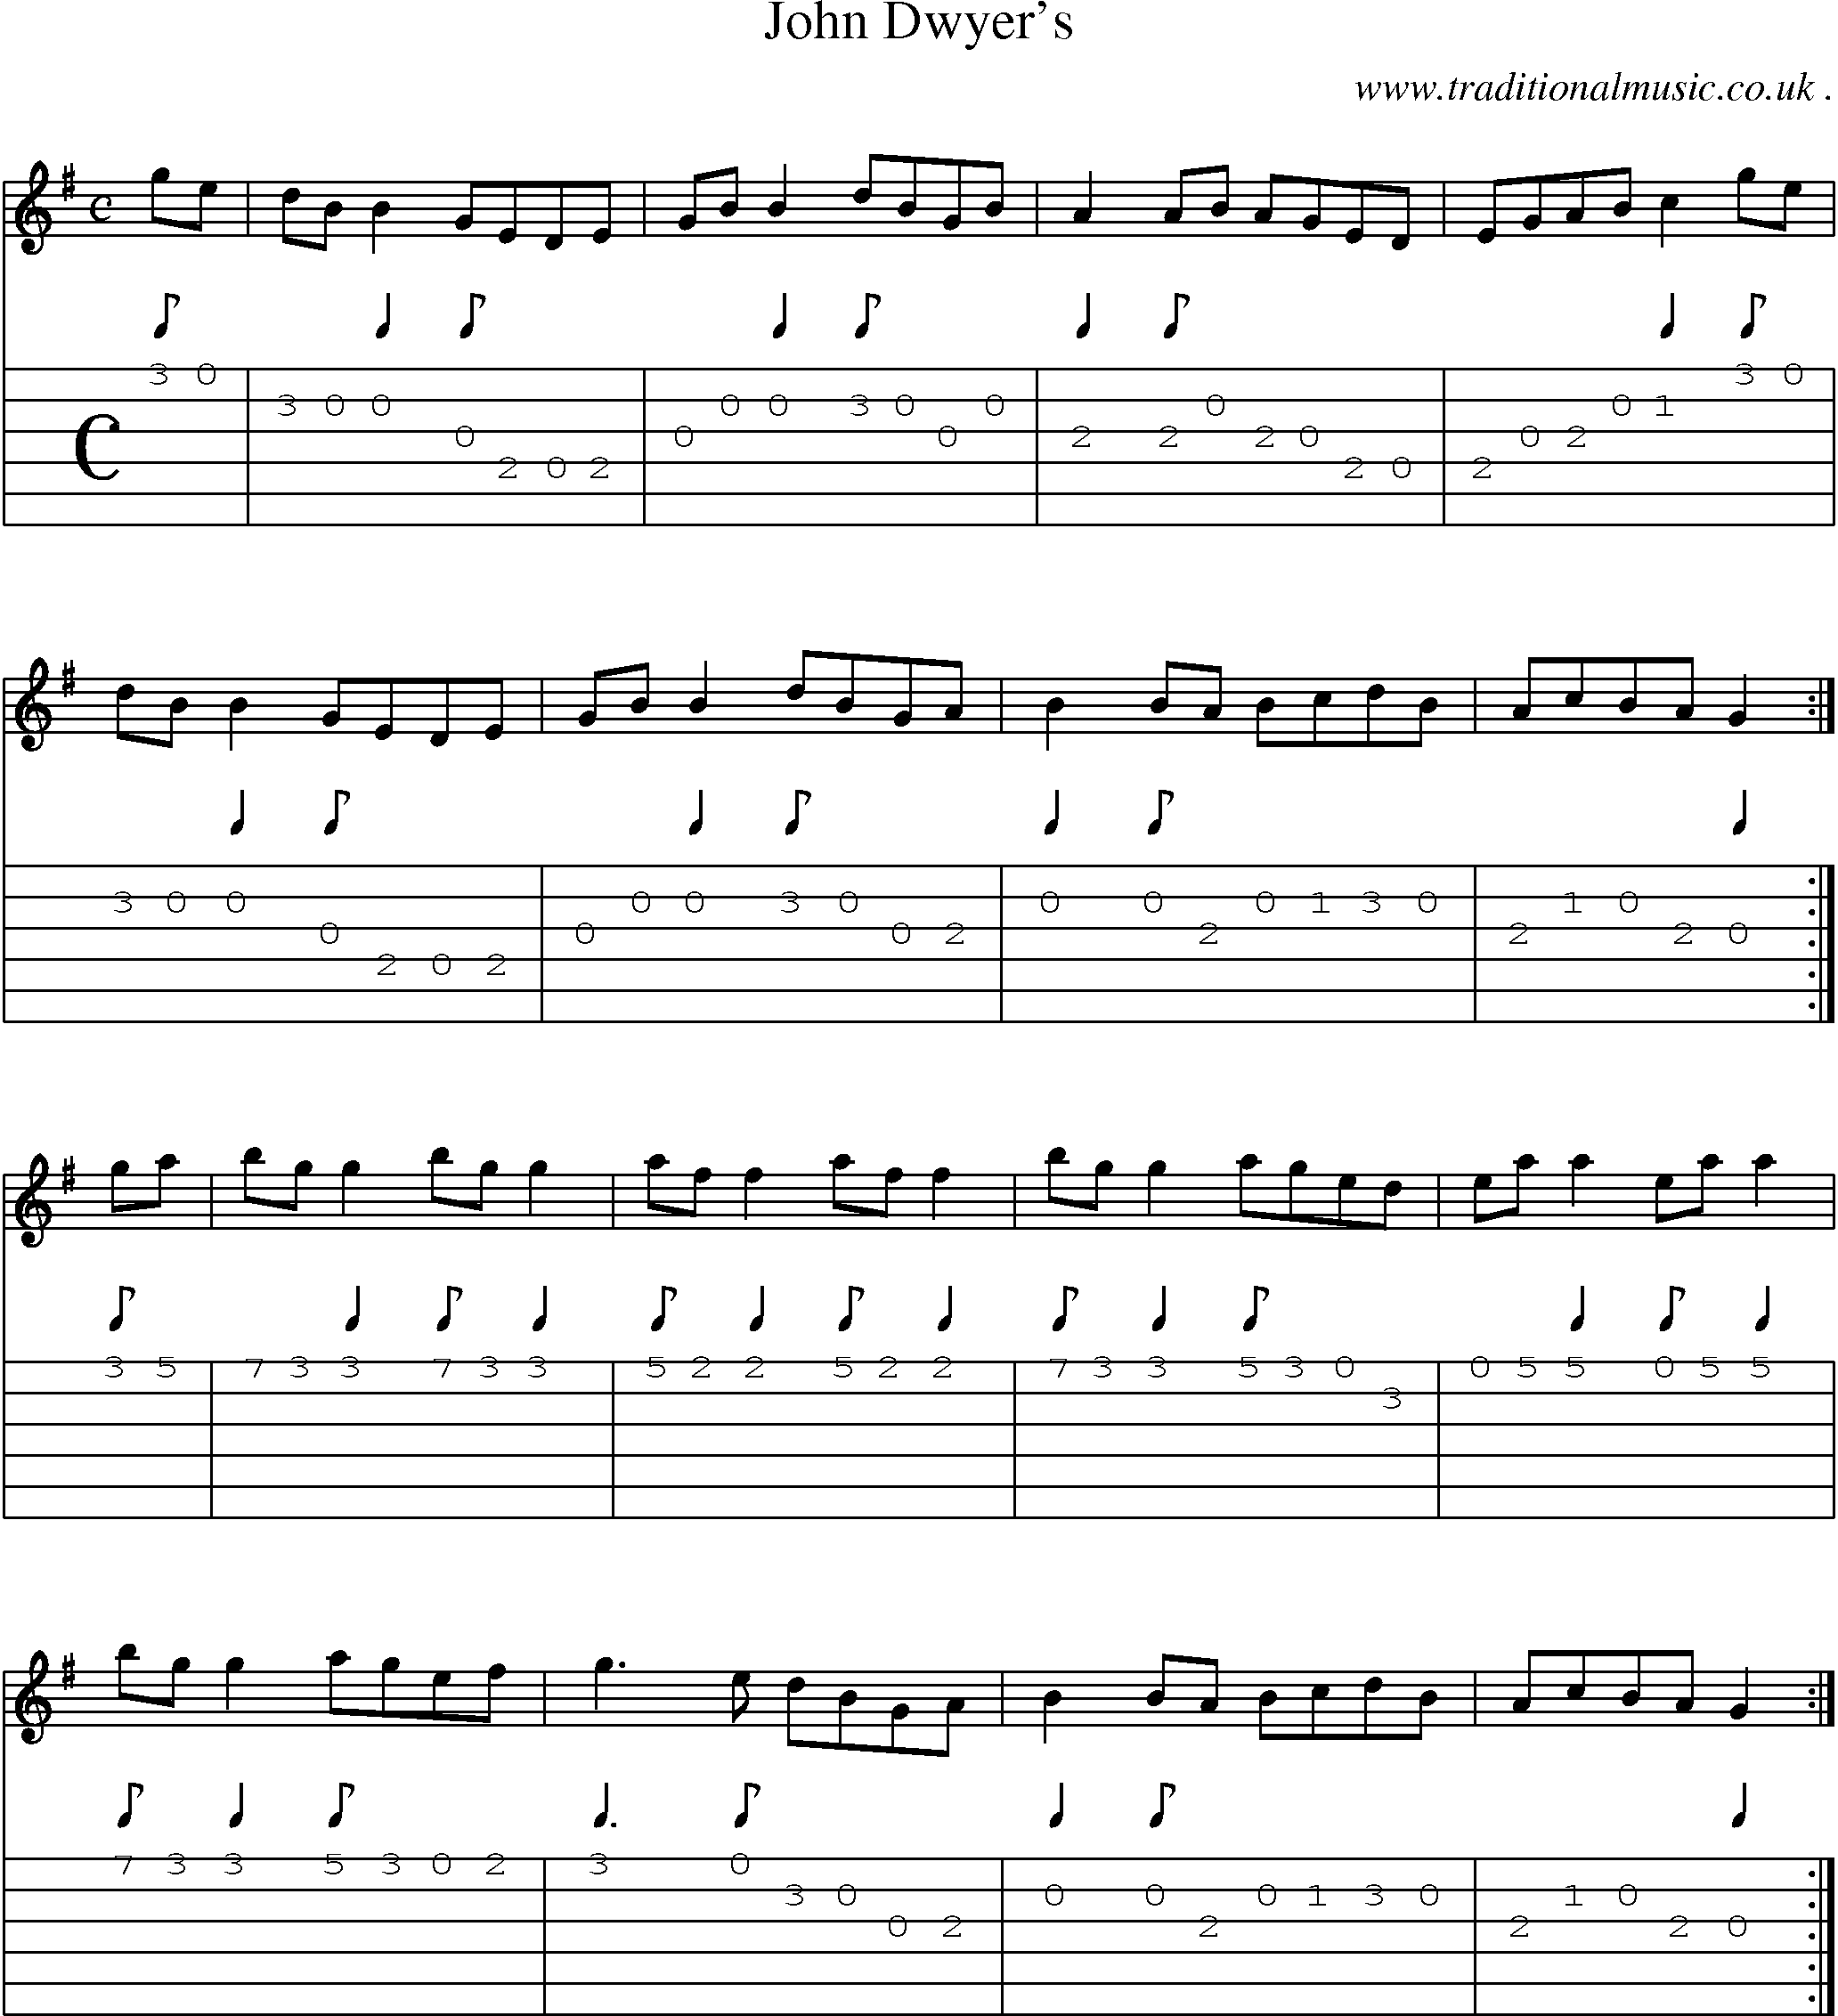 Sheet-Music and Guitar Tabs for John Dwyers